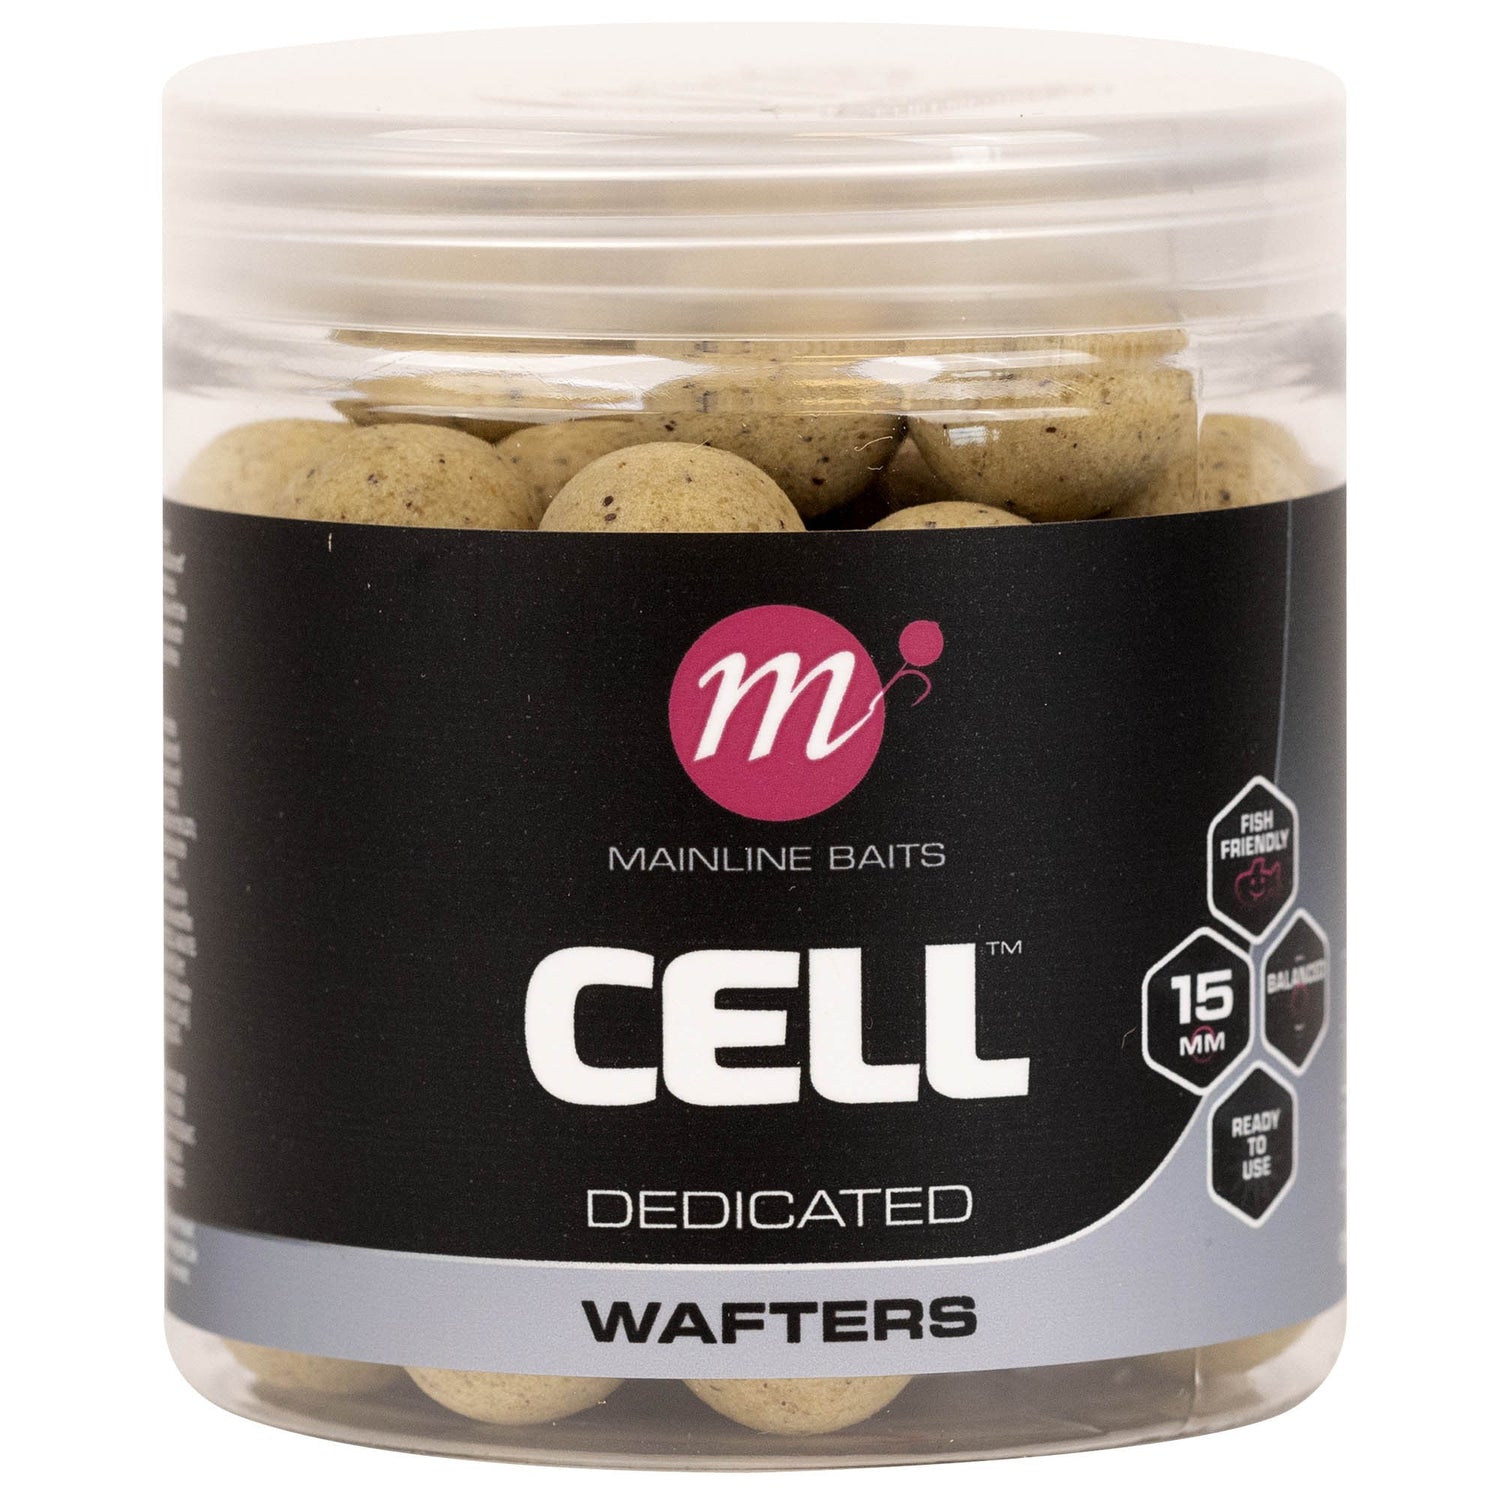 Mainline Balanced Wafters Cell 15mm